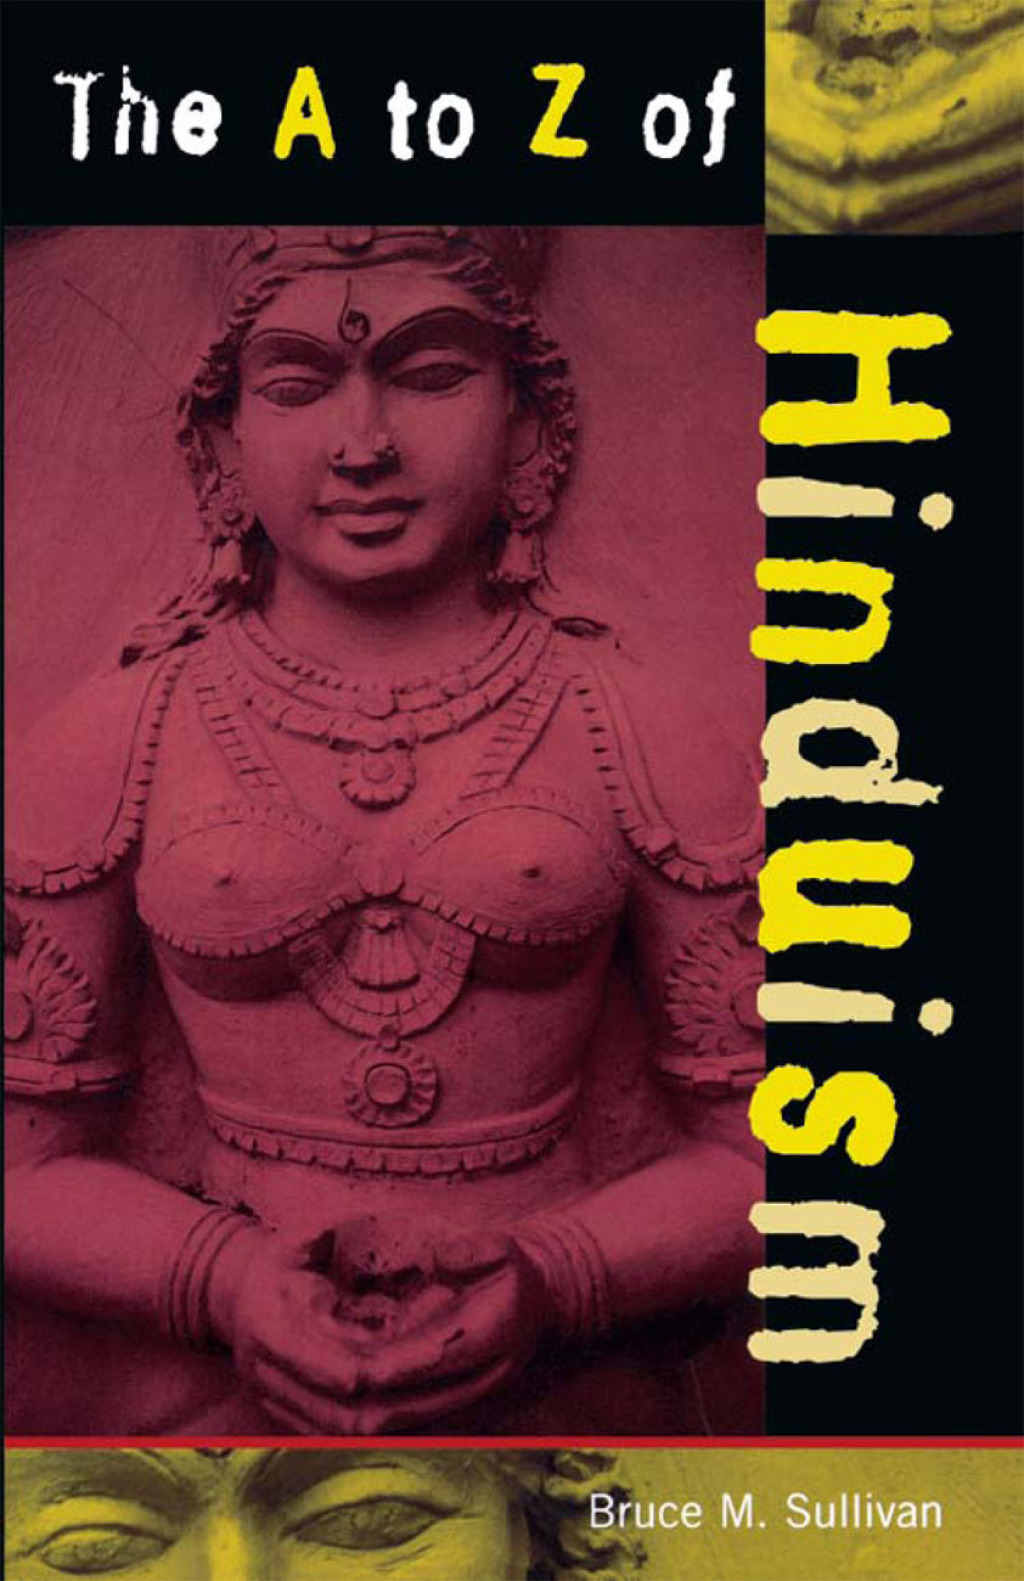 The A to Z of Hinduism (eBook Rental) - Bruce M. Sullivan,